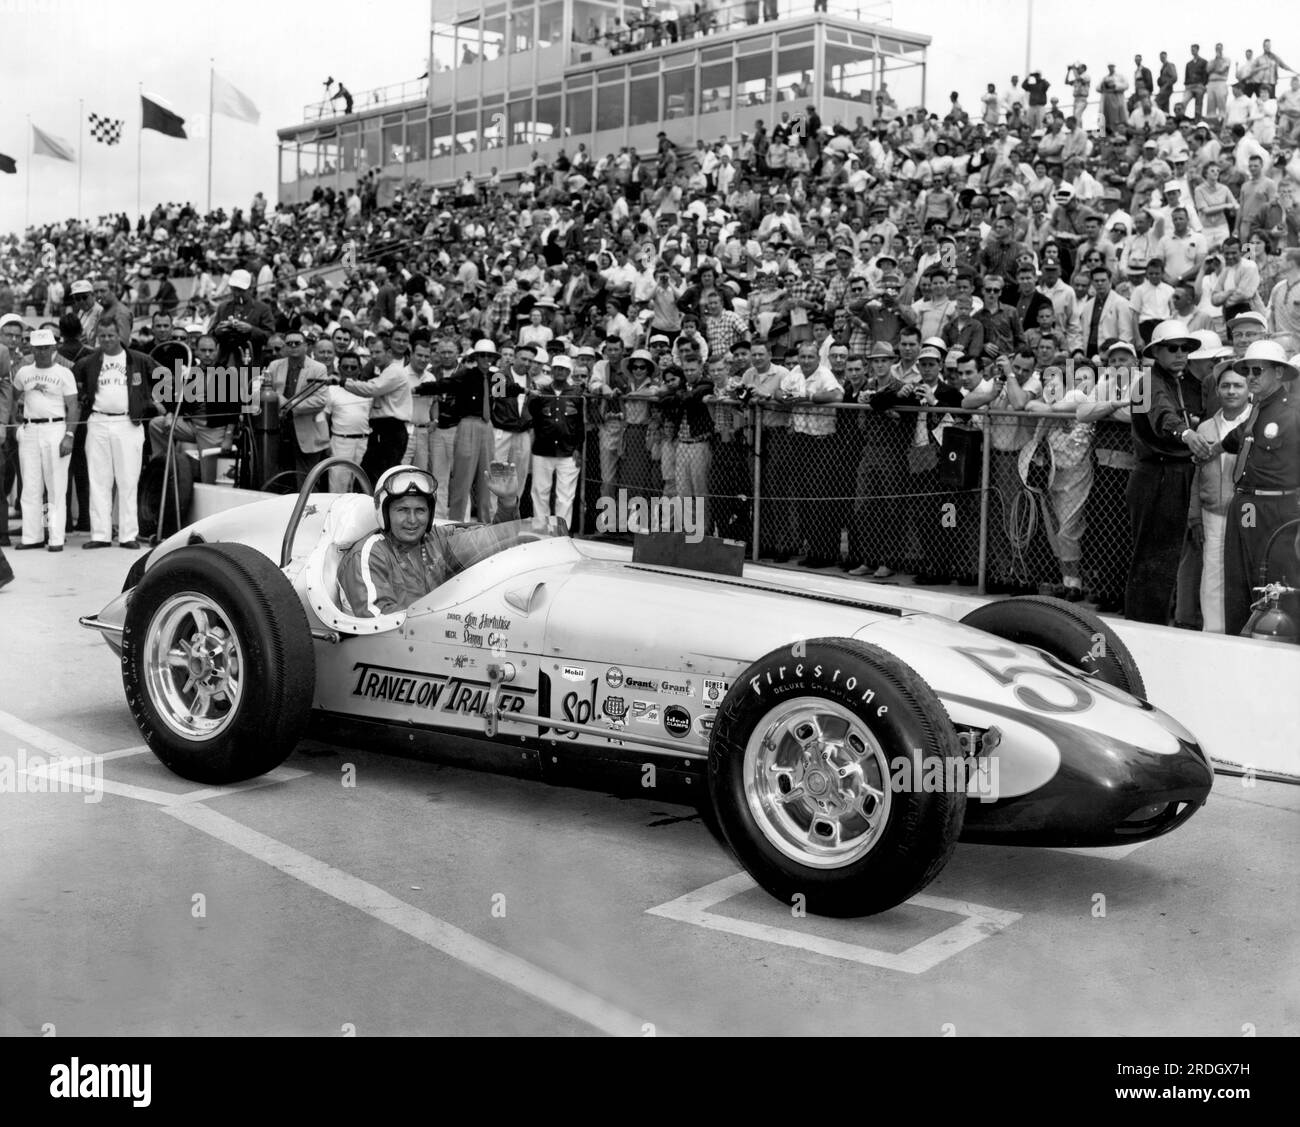 Indianapolis, Indiana:  May, 1960 Race car driver Jim Hurtubise in his car at the Indianapolis 500 race track. Stock Photo